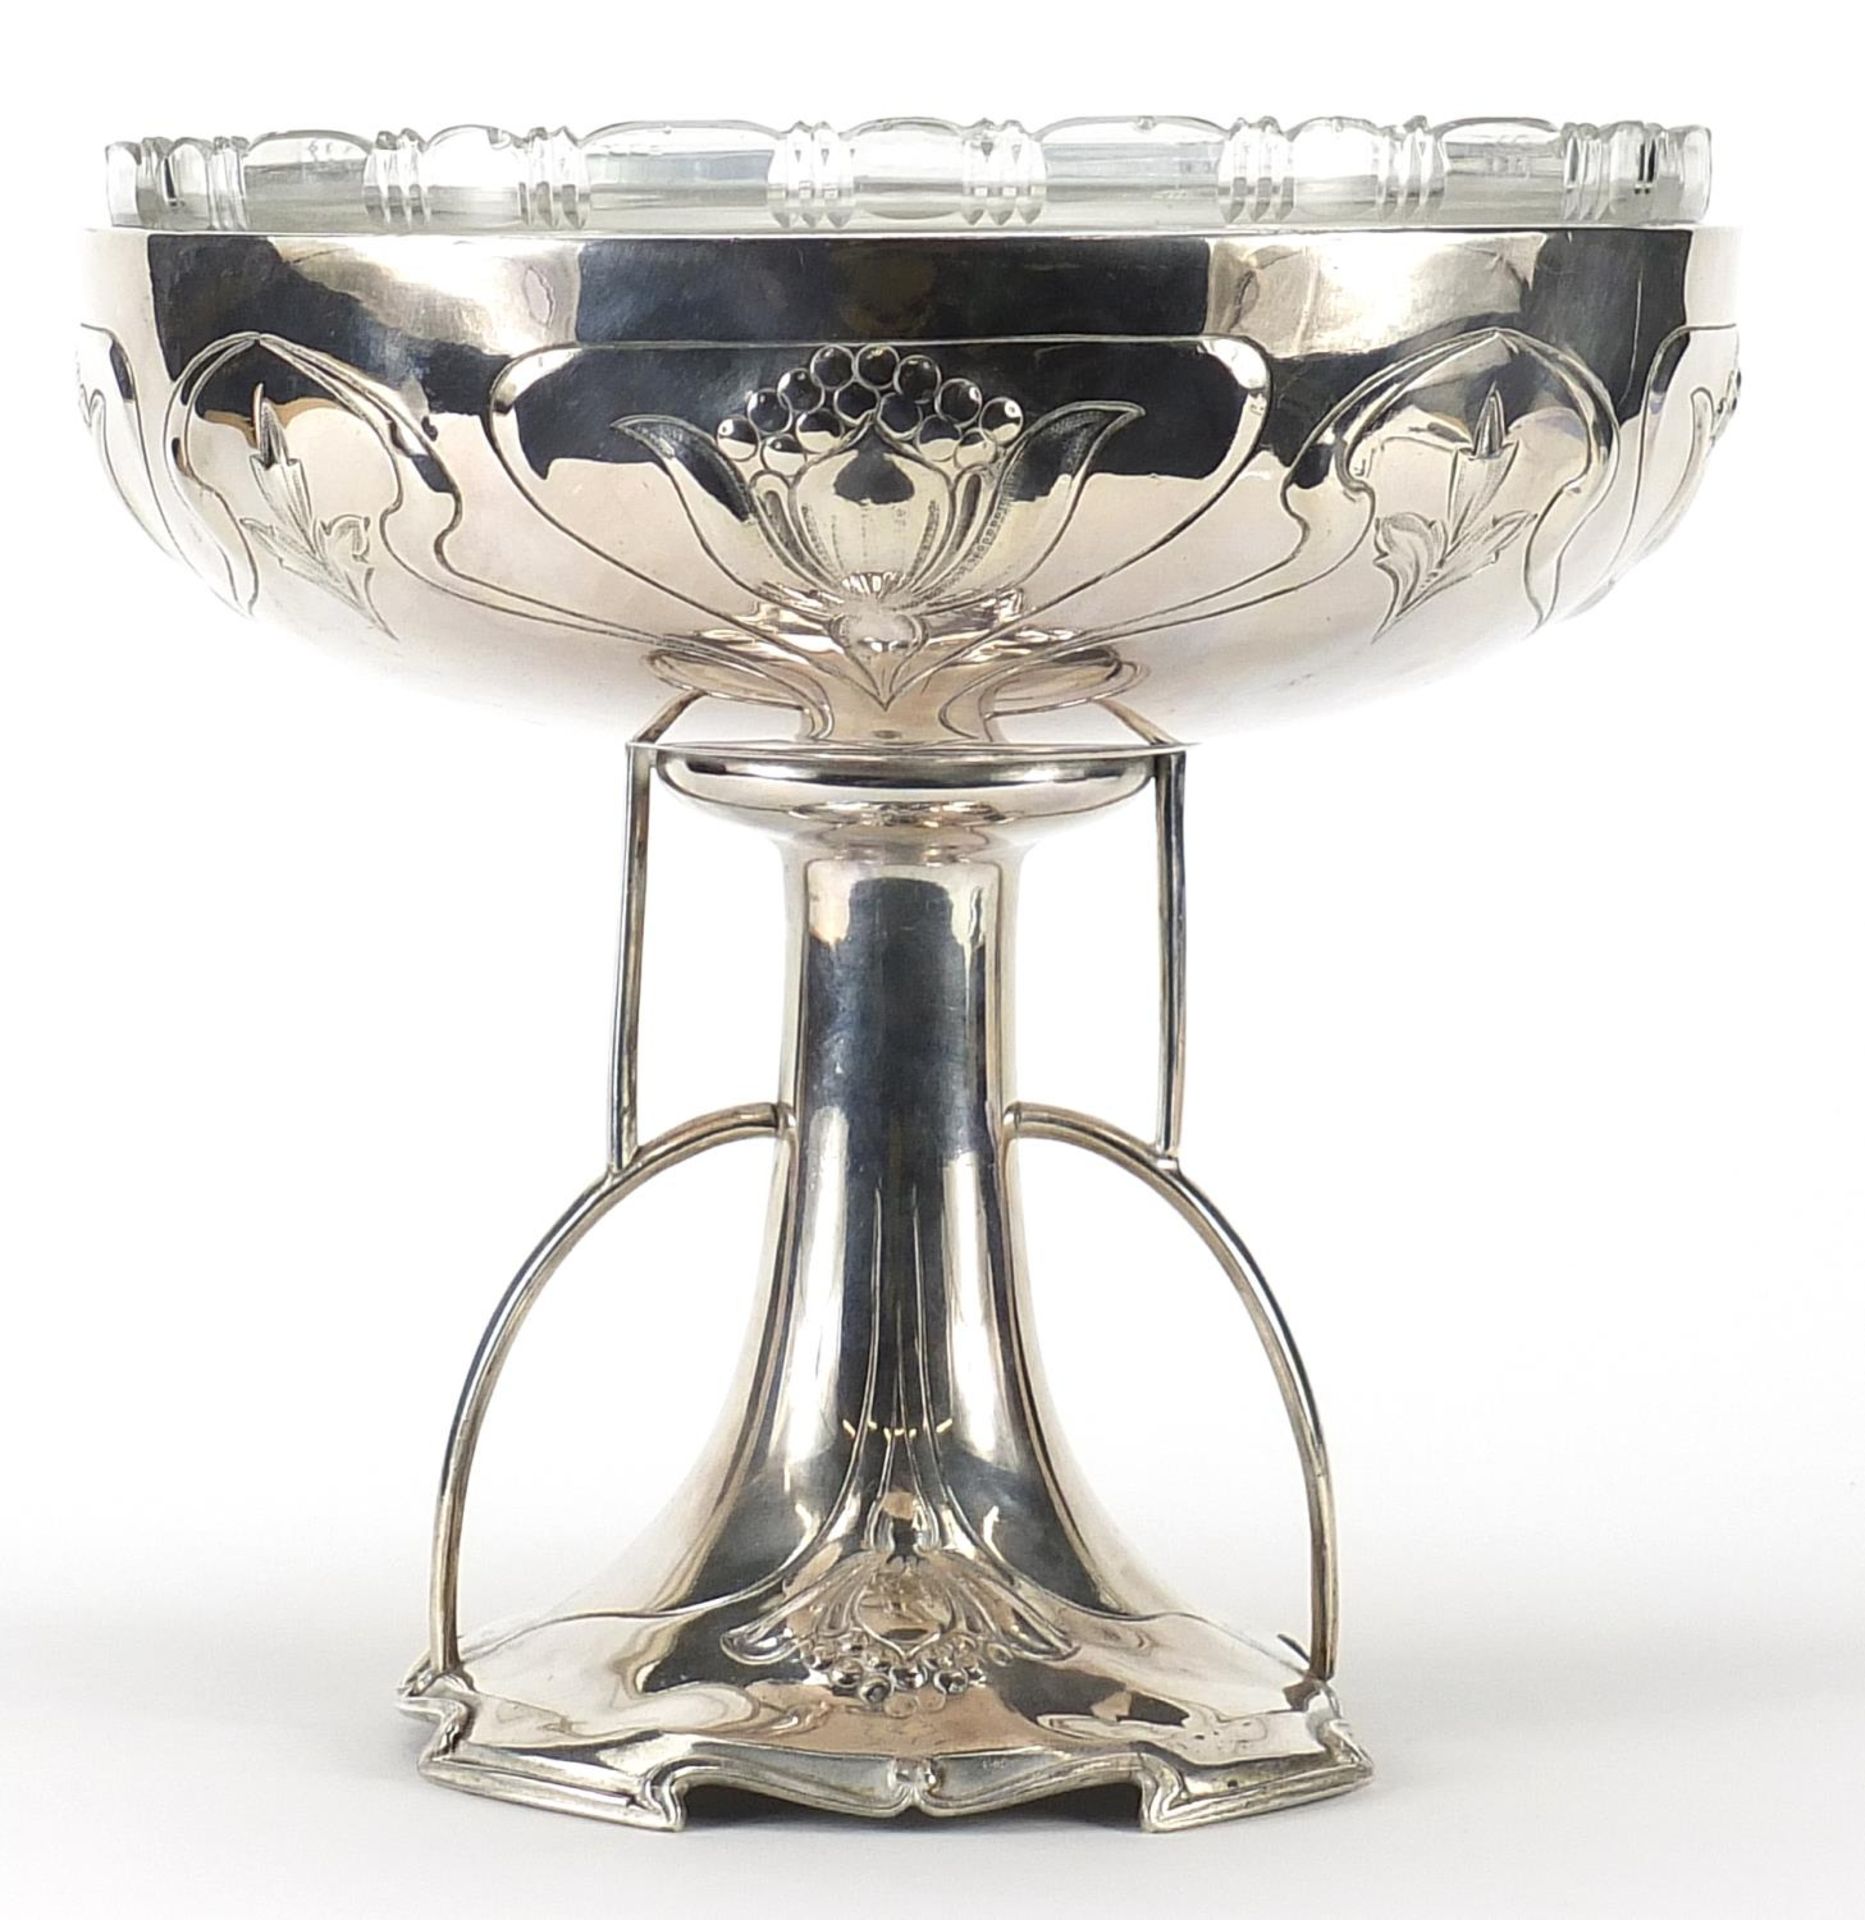 Manner of WMF, German Art Nouveau silver plated centrepiece with glass bowl, numbered 4891 to the